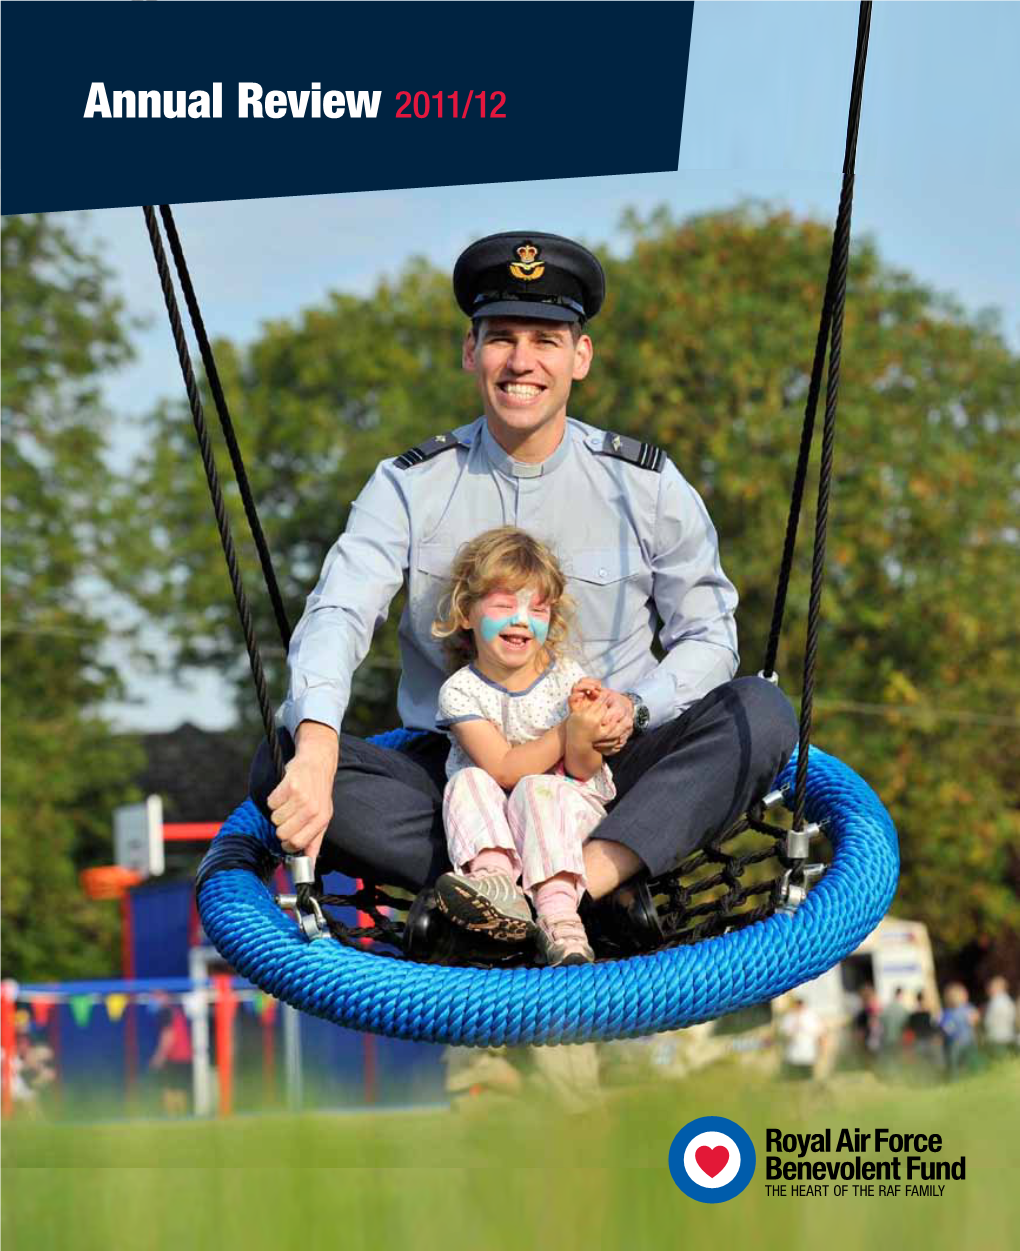 Annual Review 2011/12 ‘Times Have Certainly Changed for the Our Goals in 2011 Contents Our Goals in 2011 Royal Air Force